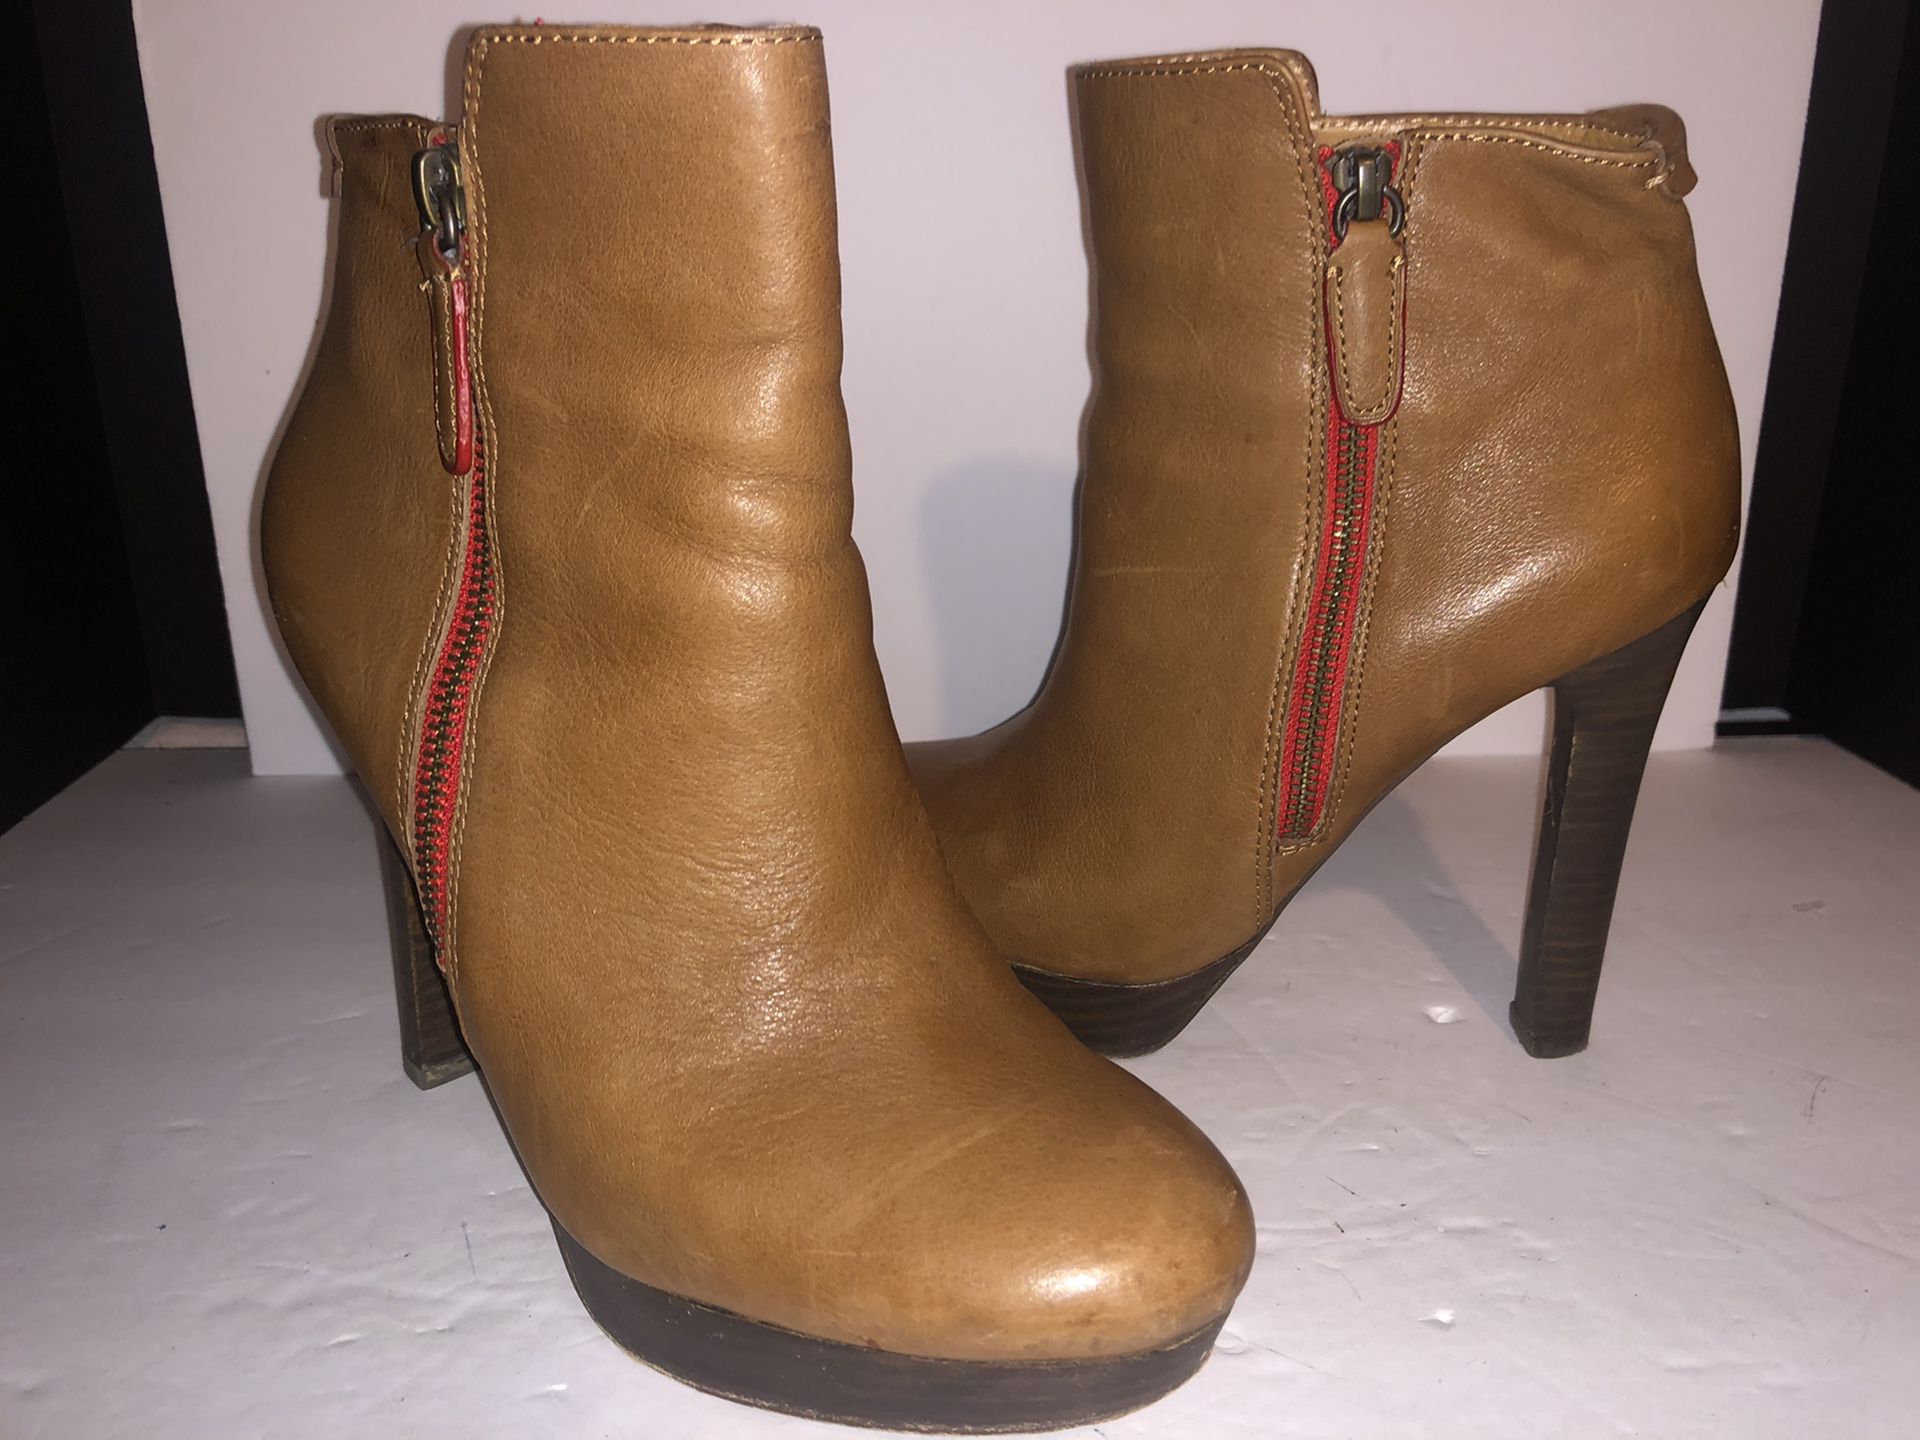 Coach Chryassa bootie boots leather size 7.5